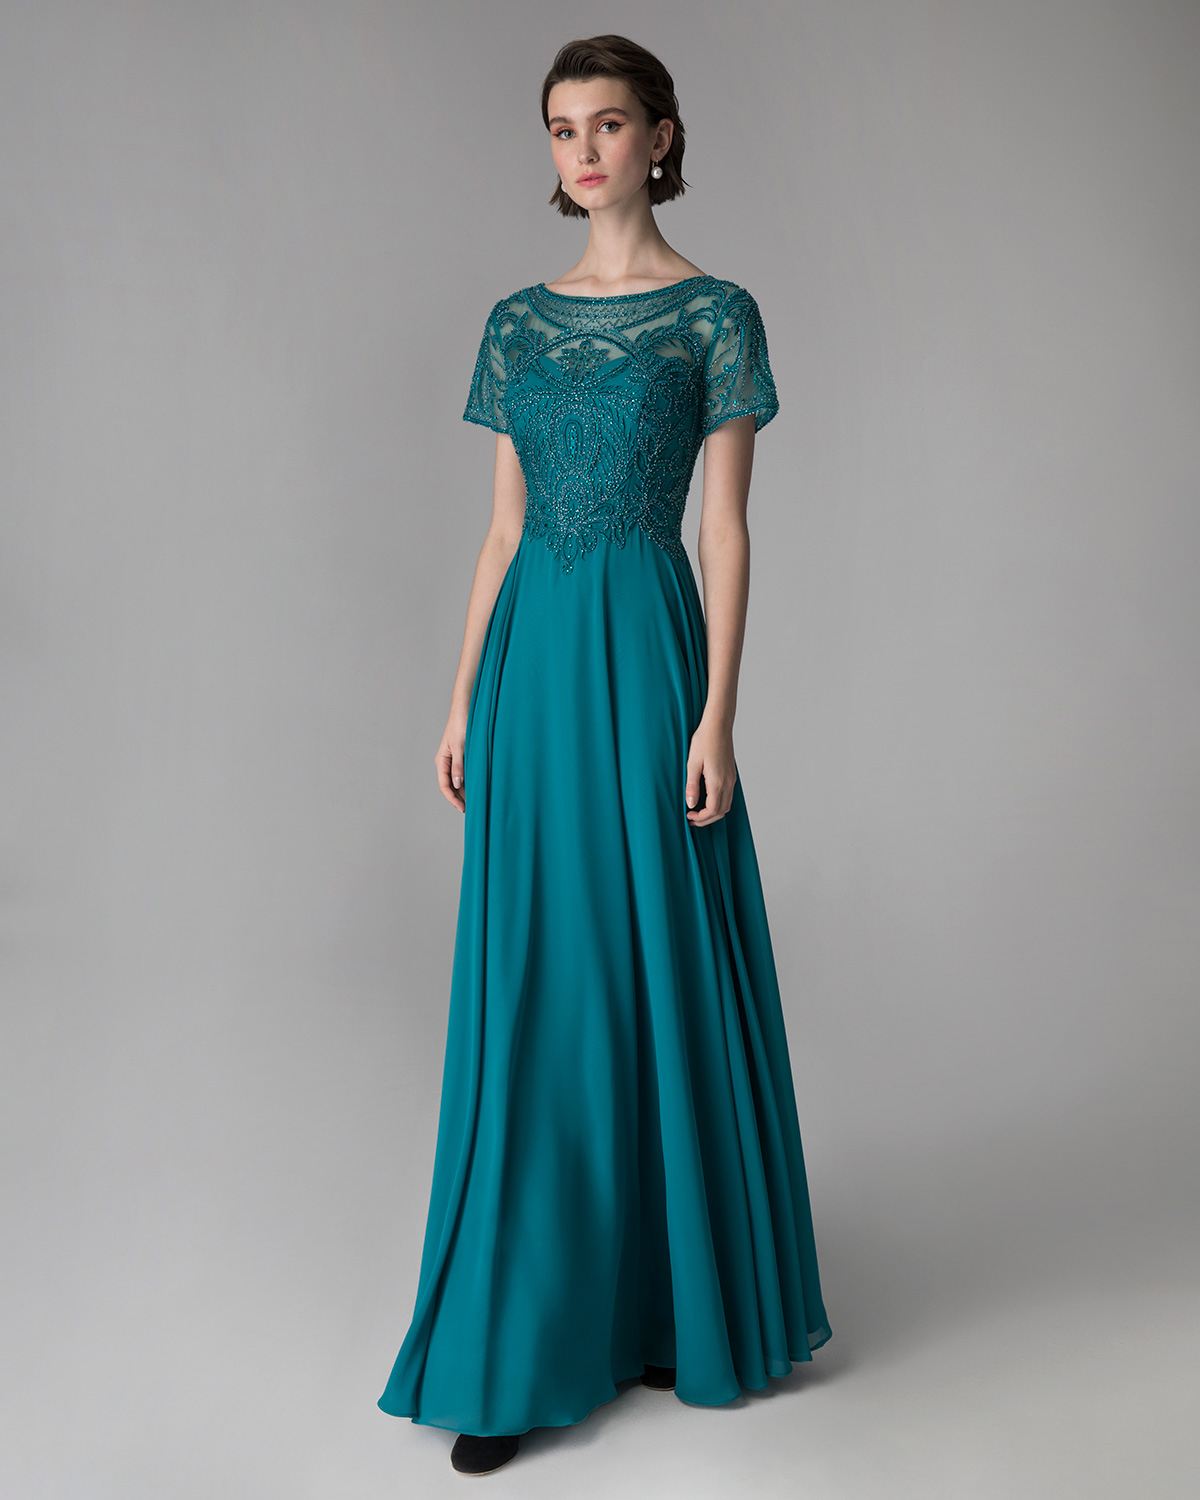 Classic Dresses / Long evening dress for the mother of the bride with fully beaded top and short sleeves